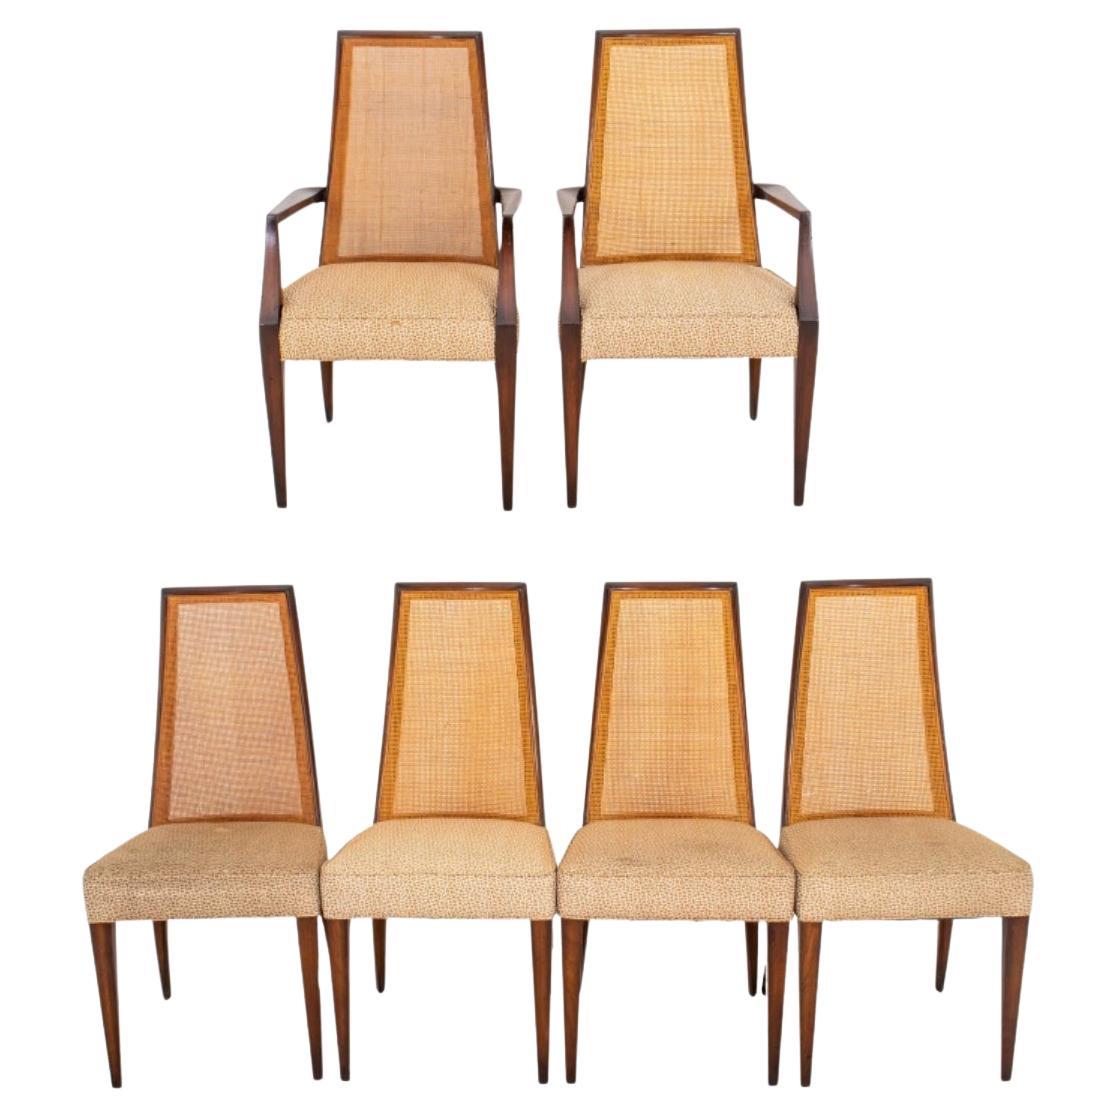 Danish Modern Mahogany Caned Dining Chairs, Set of 6 For Sale